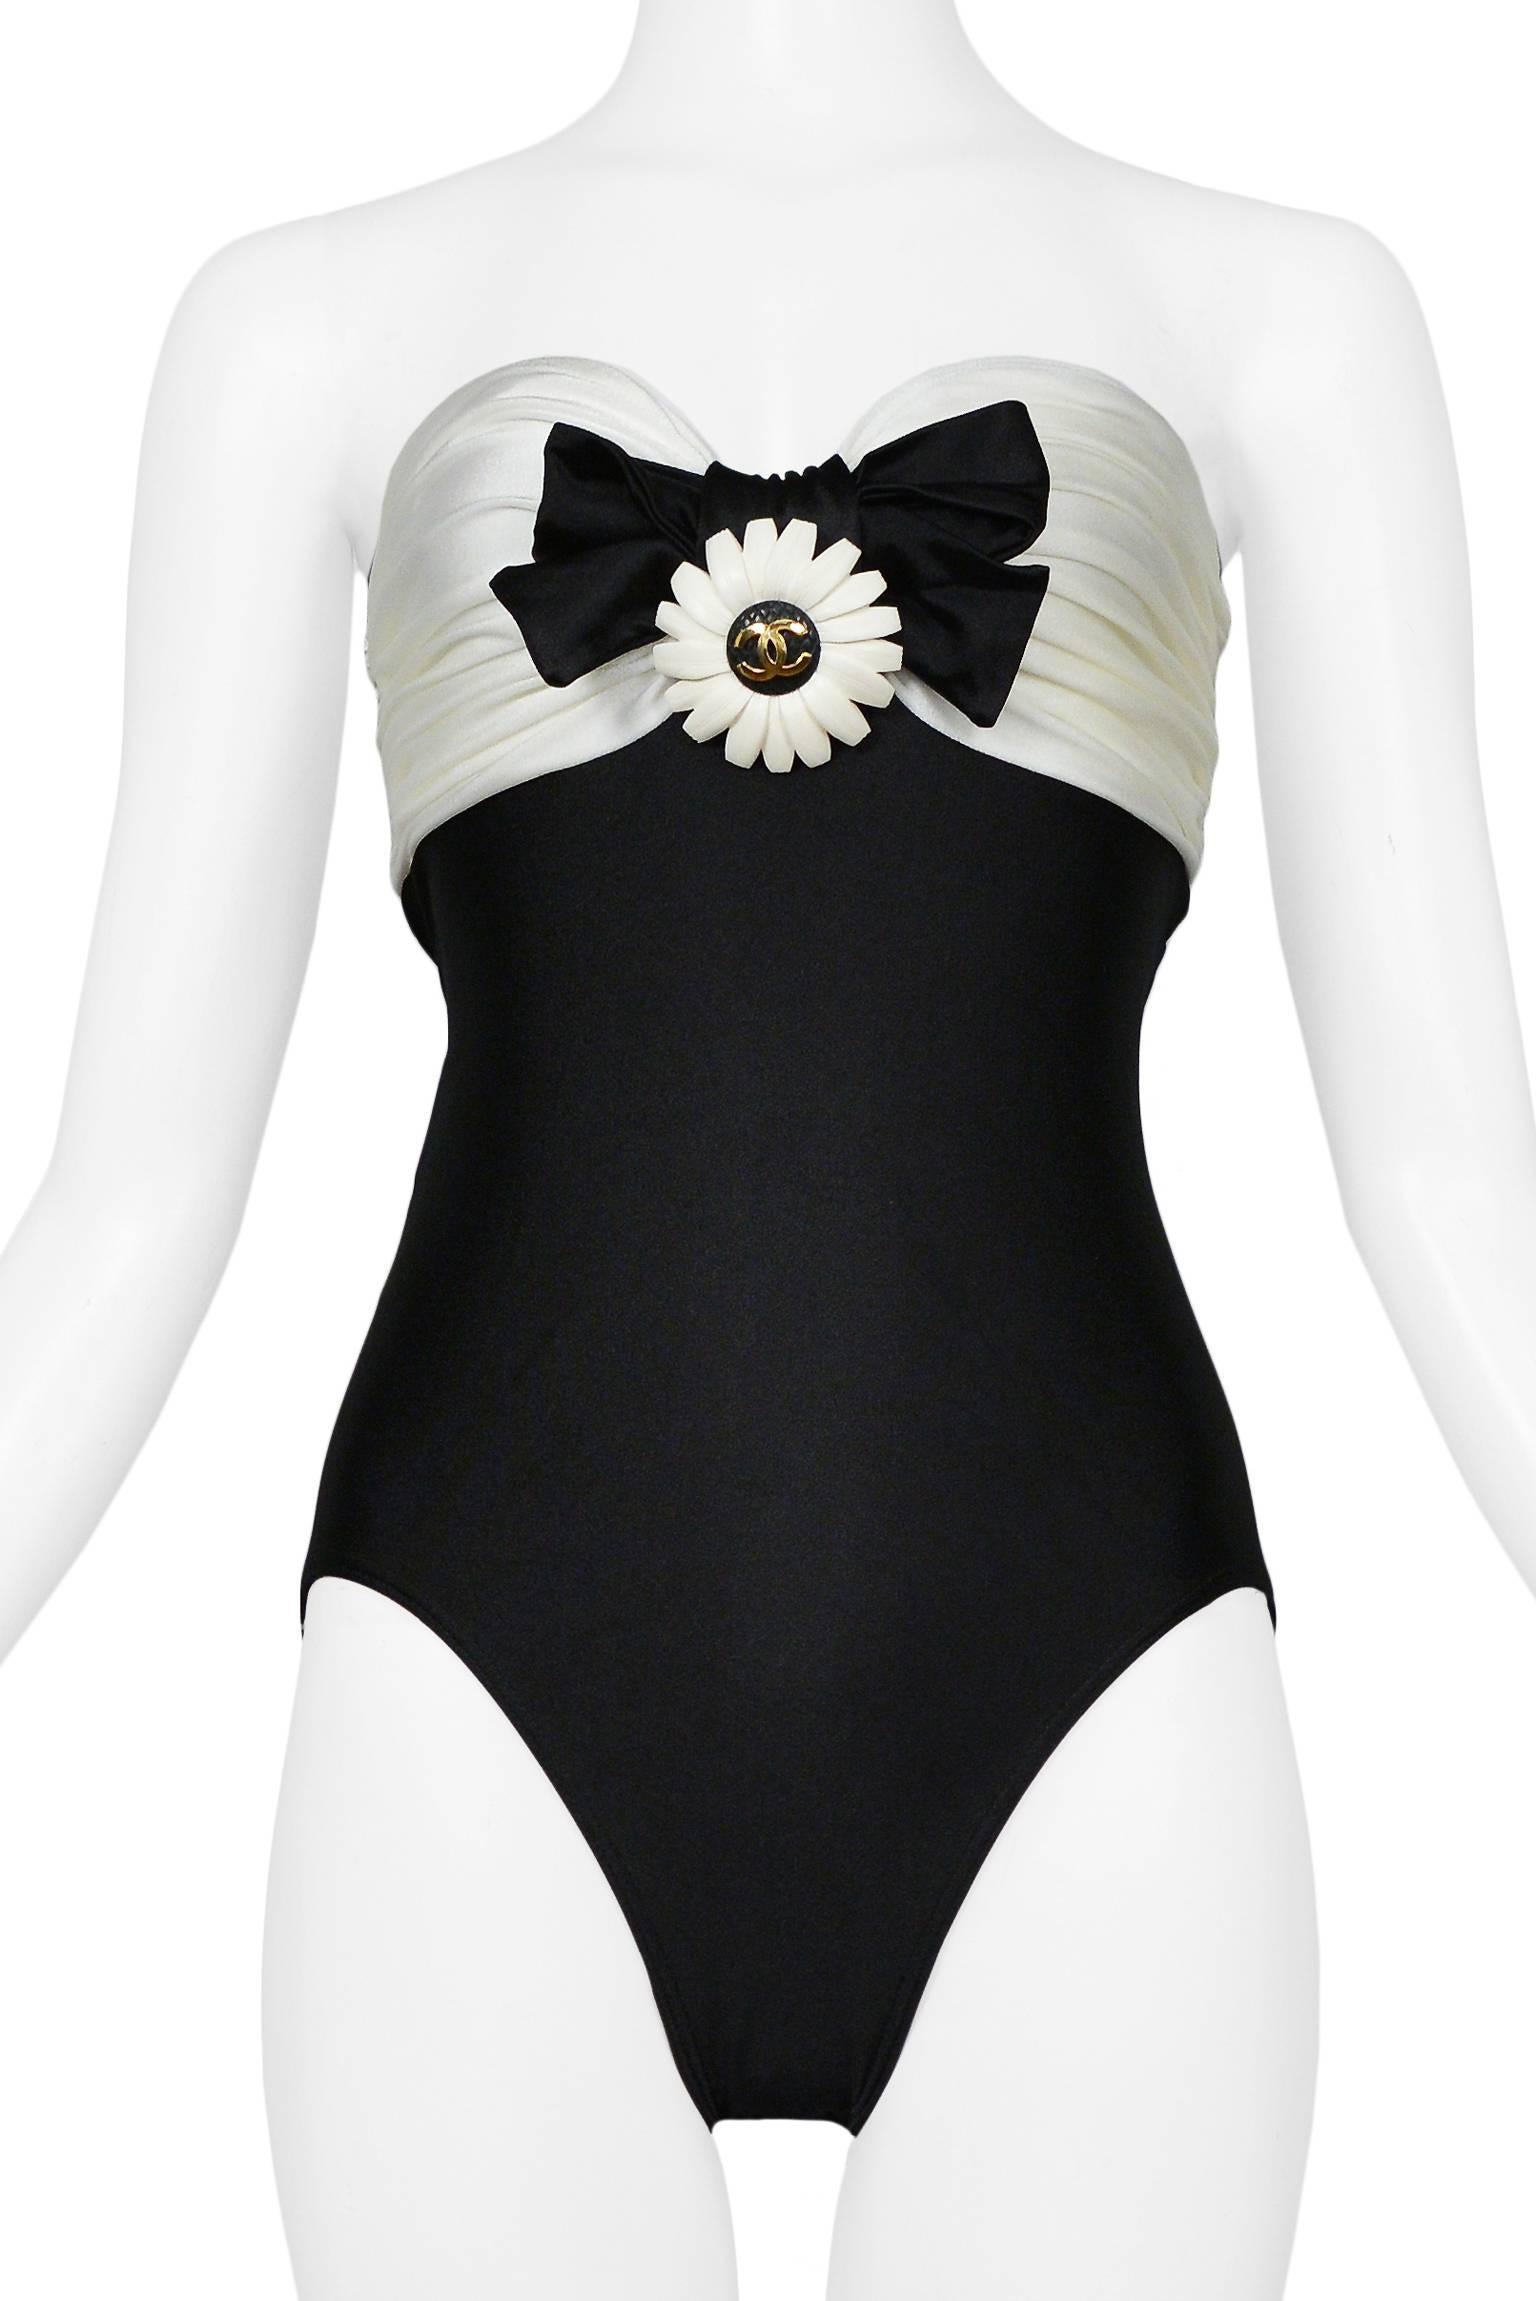 Chanel Sculptural Daisy Charm & Bow Black & White Swimsuit - Never Worn In New Condition In Los Angeles, CA